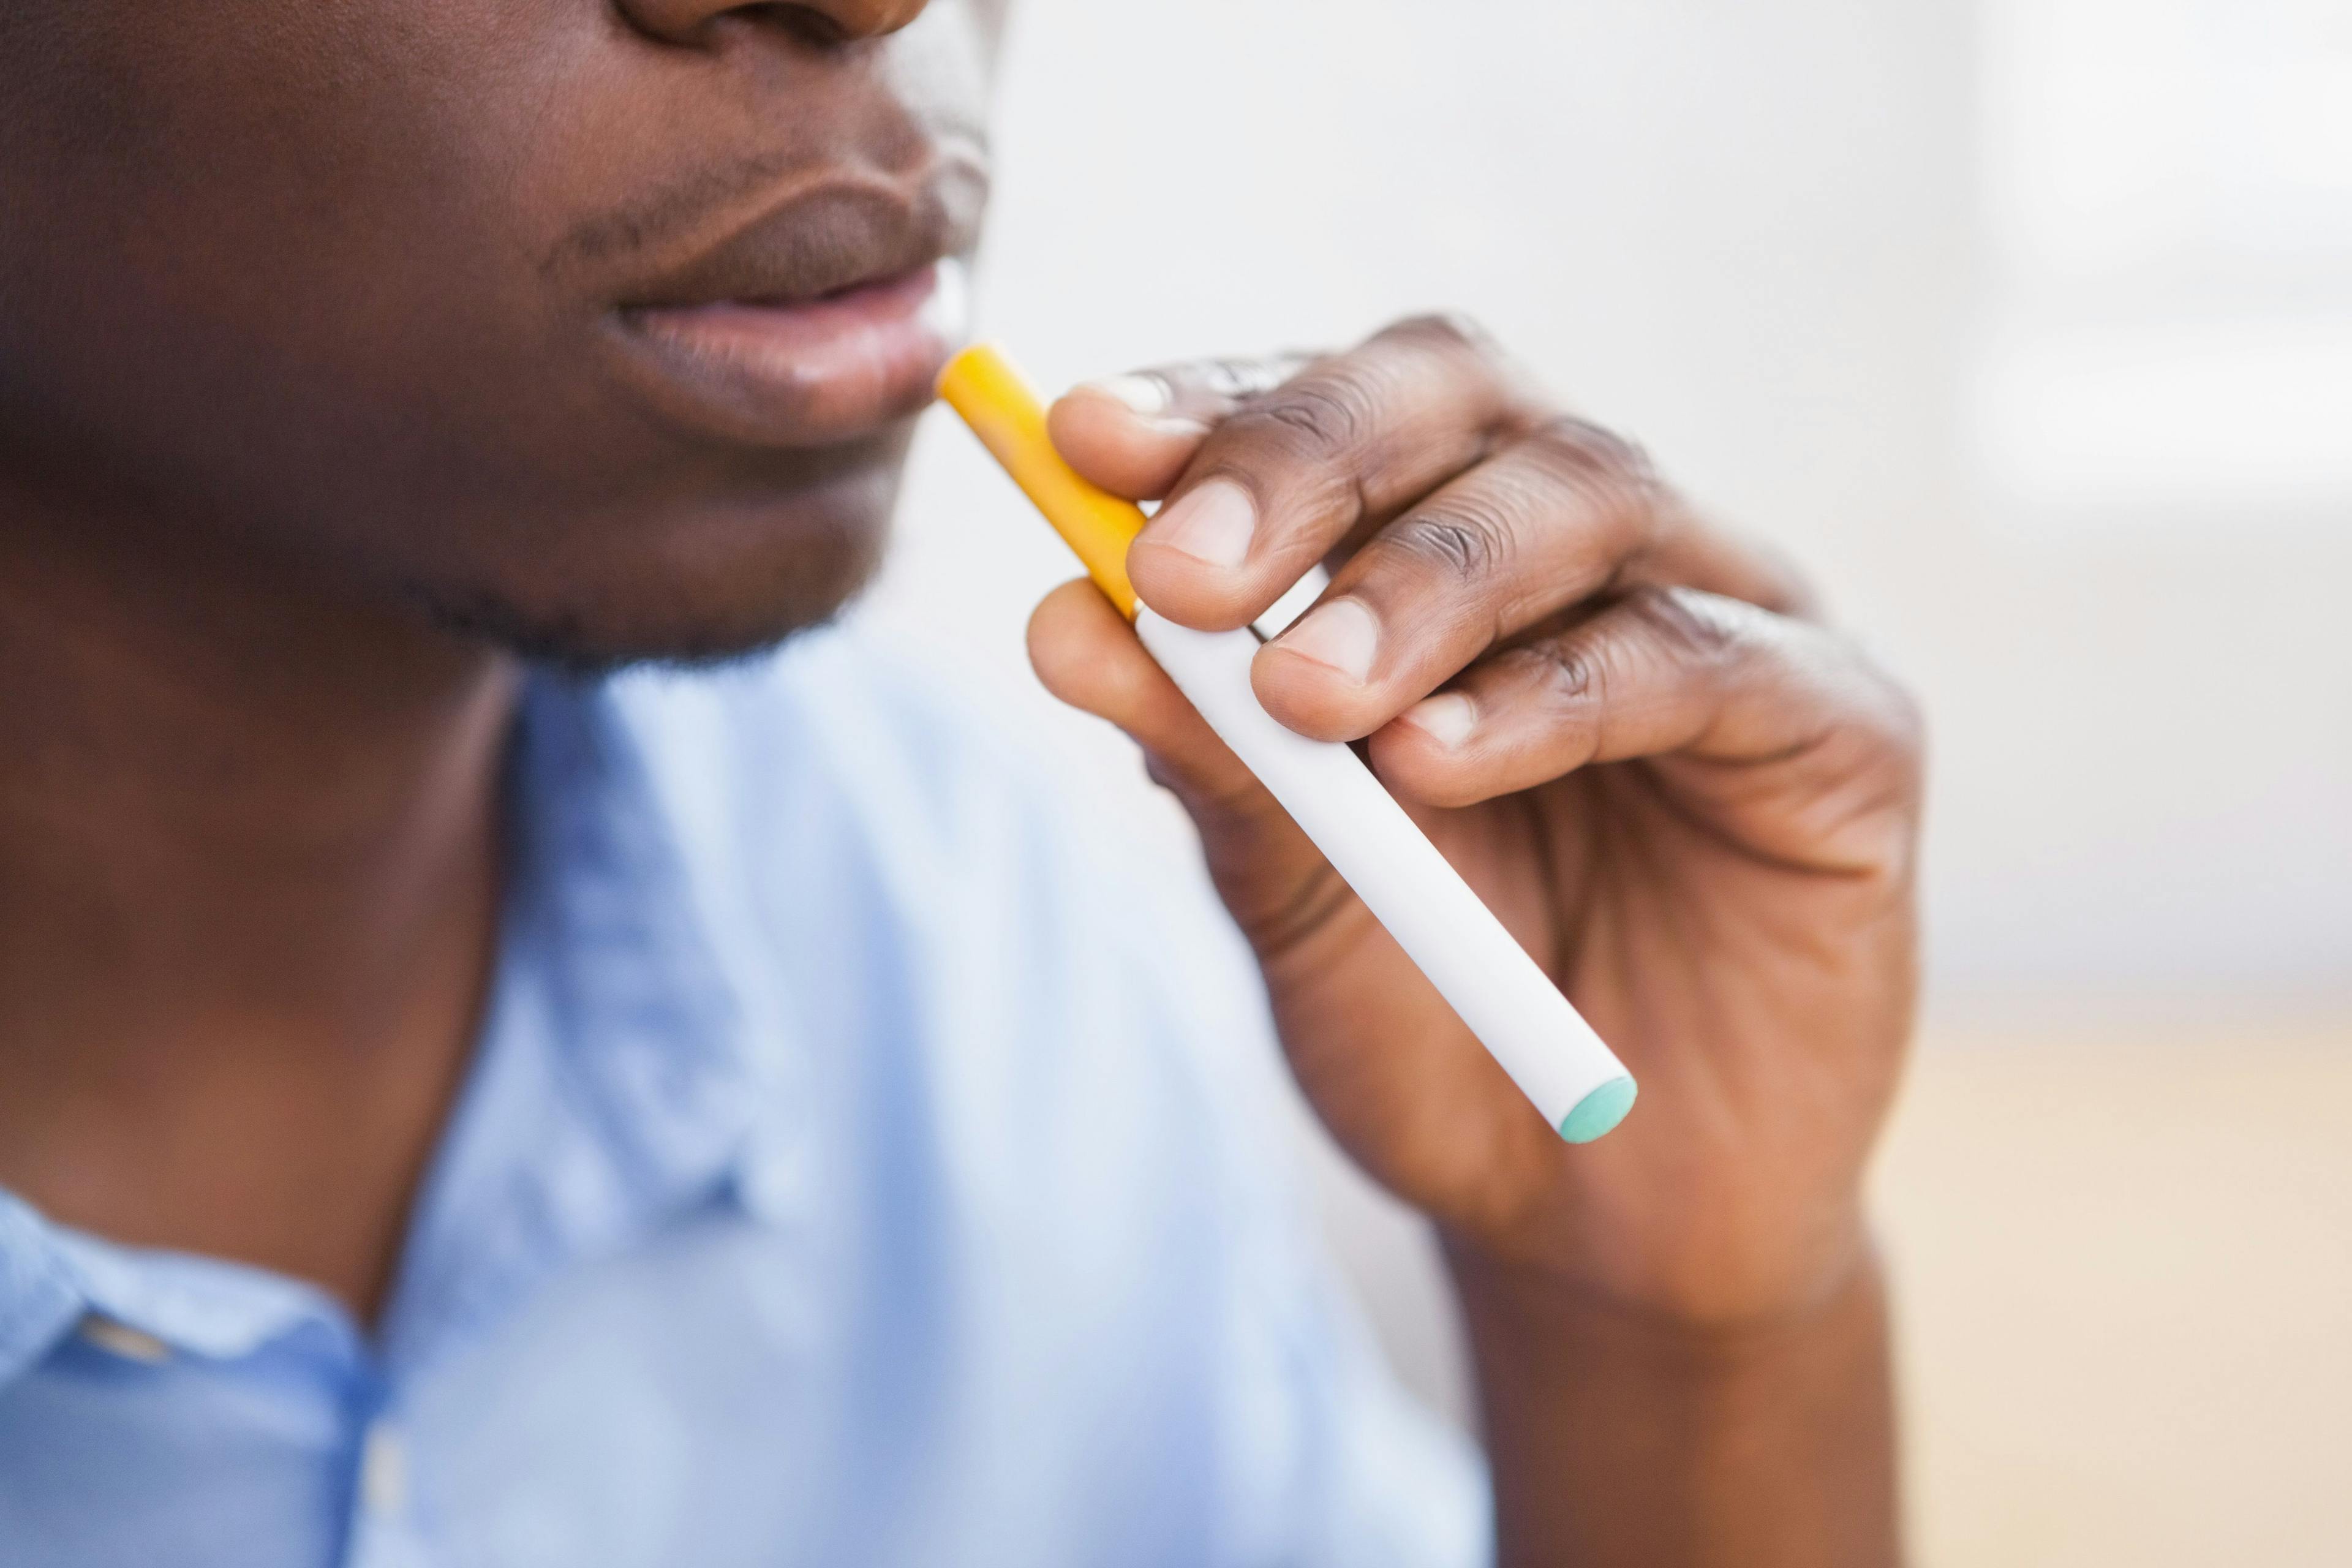 Do ADHD symptoms impact smoking cessation outcomes? Researchers performed a randomized controlled trial of varenicline for tobacco cessation in adolescents and young adults.